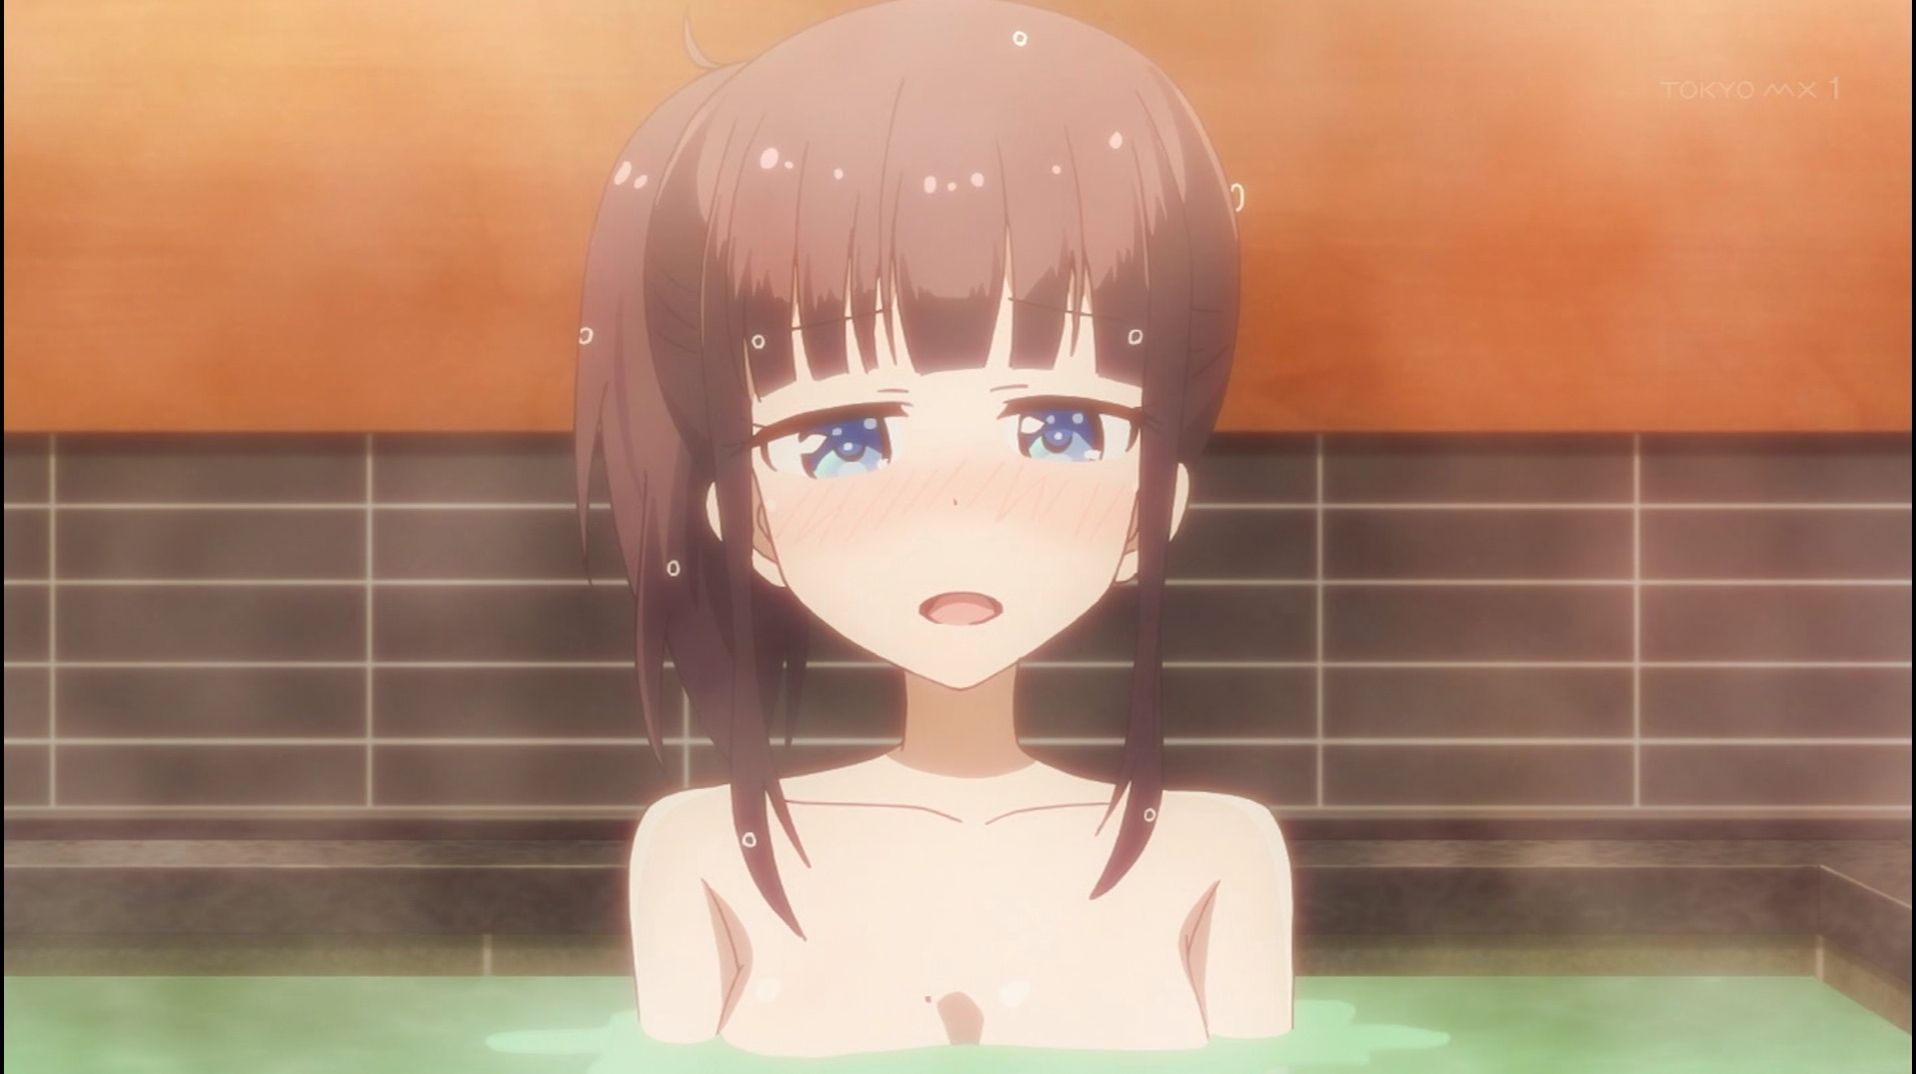 [Artificial mouth times] "NEW GAME! "Of all nine episodes, Yuri hifumi nude too たまらな of wwwwwwwww 18